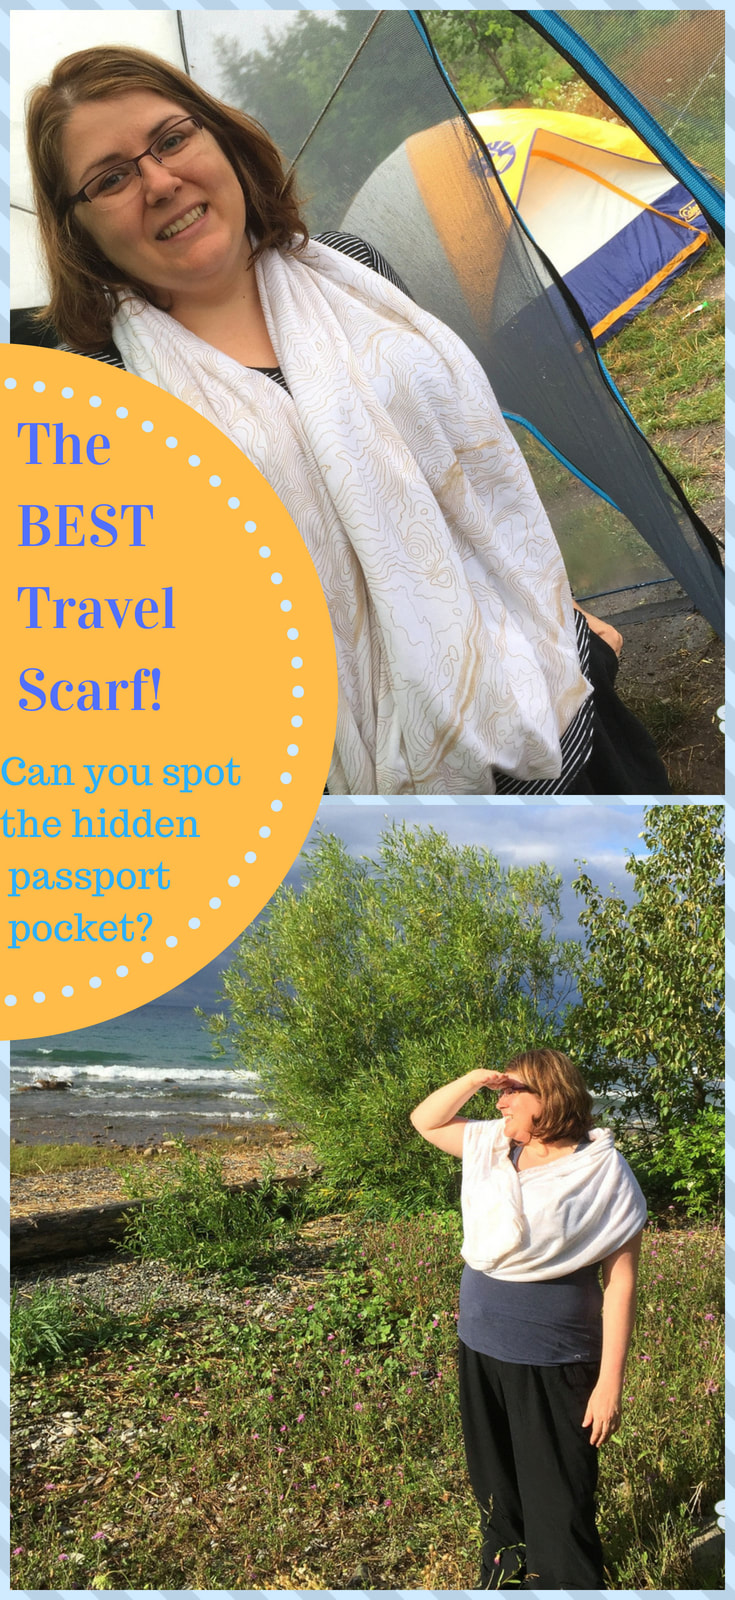 Looking for the BEST travel scarf? We're reviewing an incredible infinity travel scarf with the sneakiest hidden passport pocket so your trip is safe, secure - and stylish. https://www.turnipseedtravel.com/blog/scarf-with-pockets